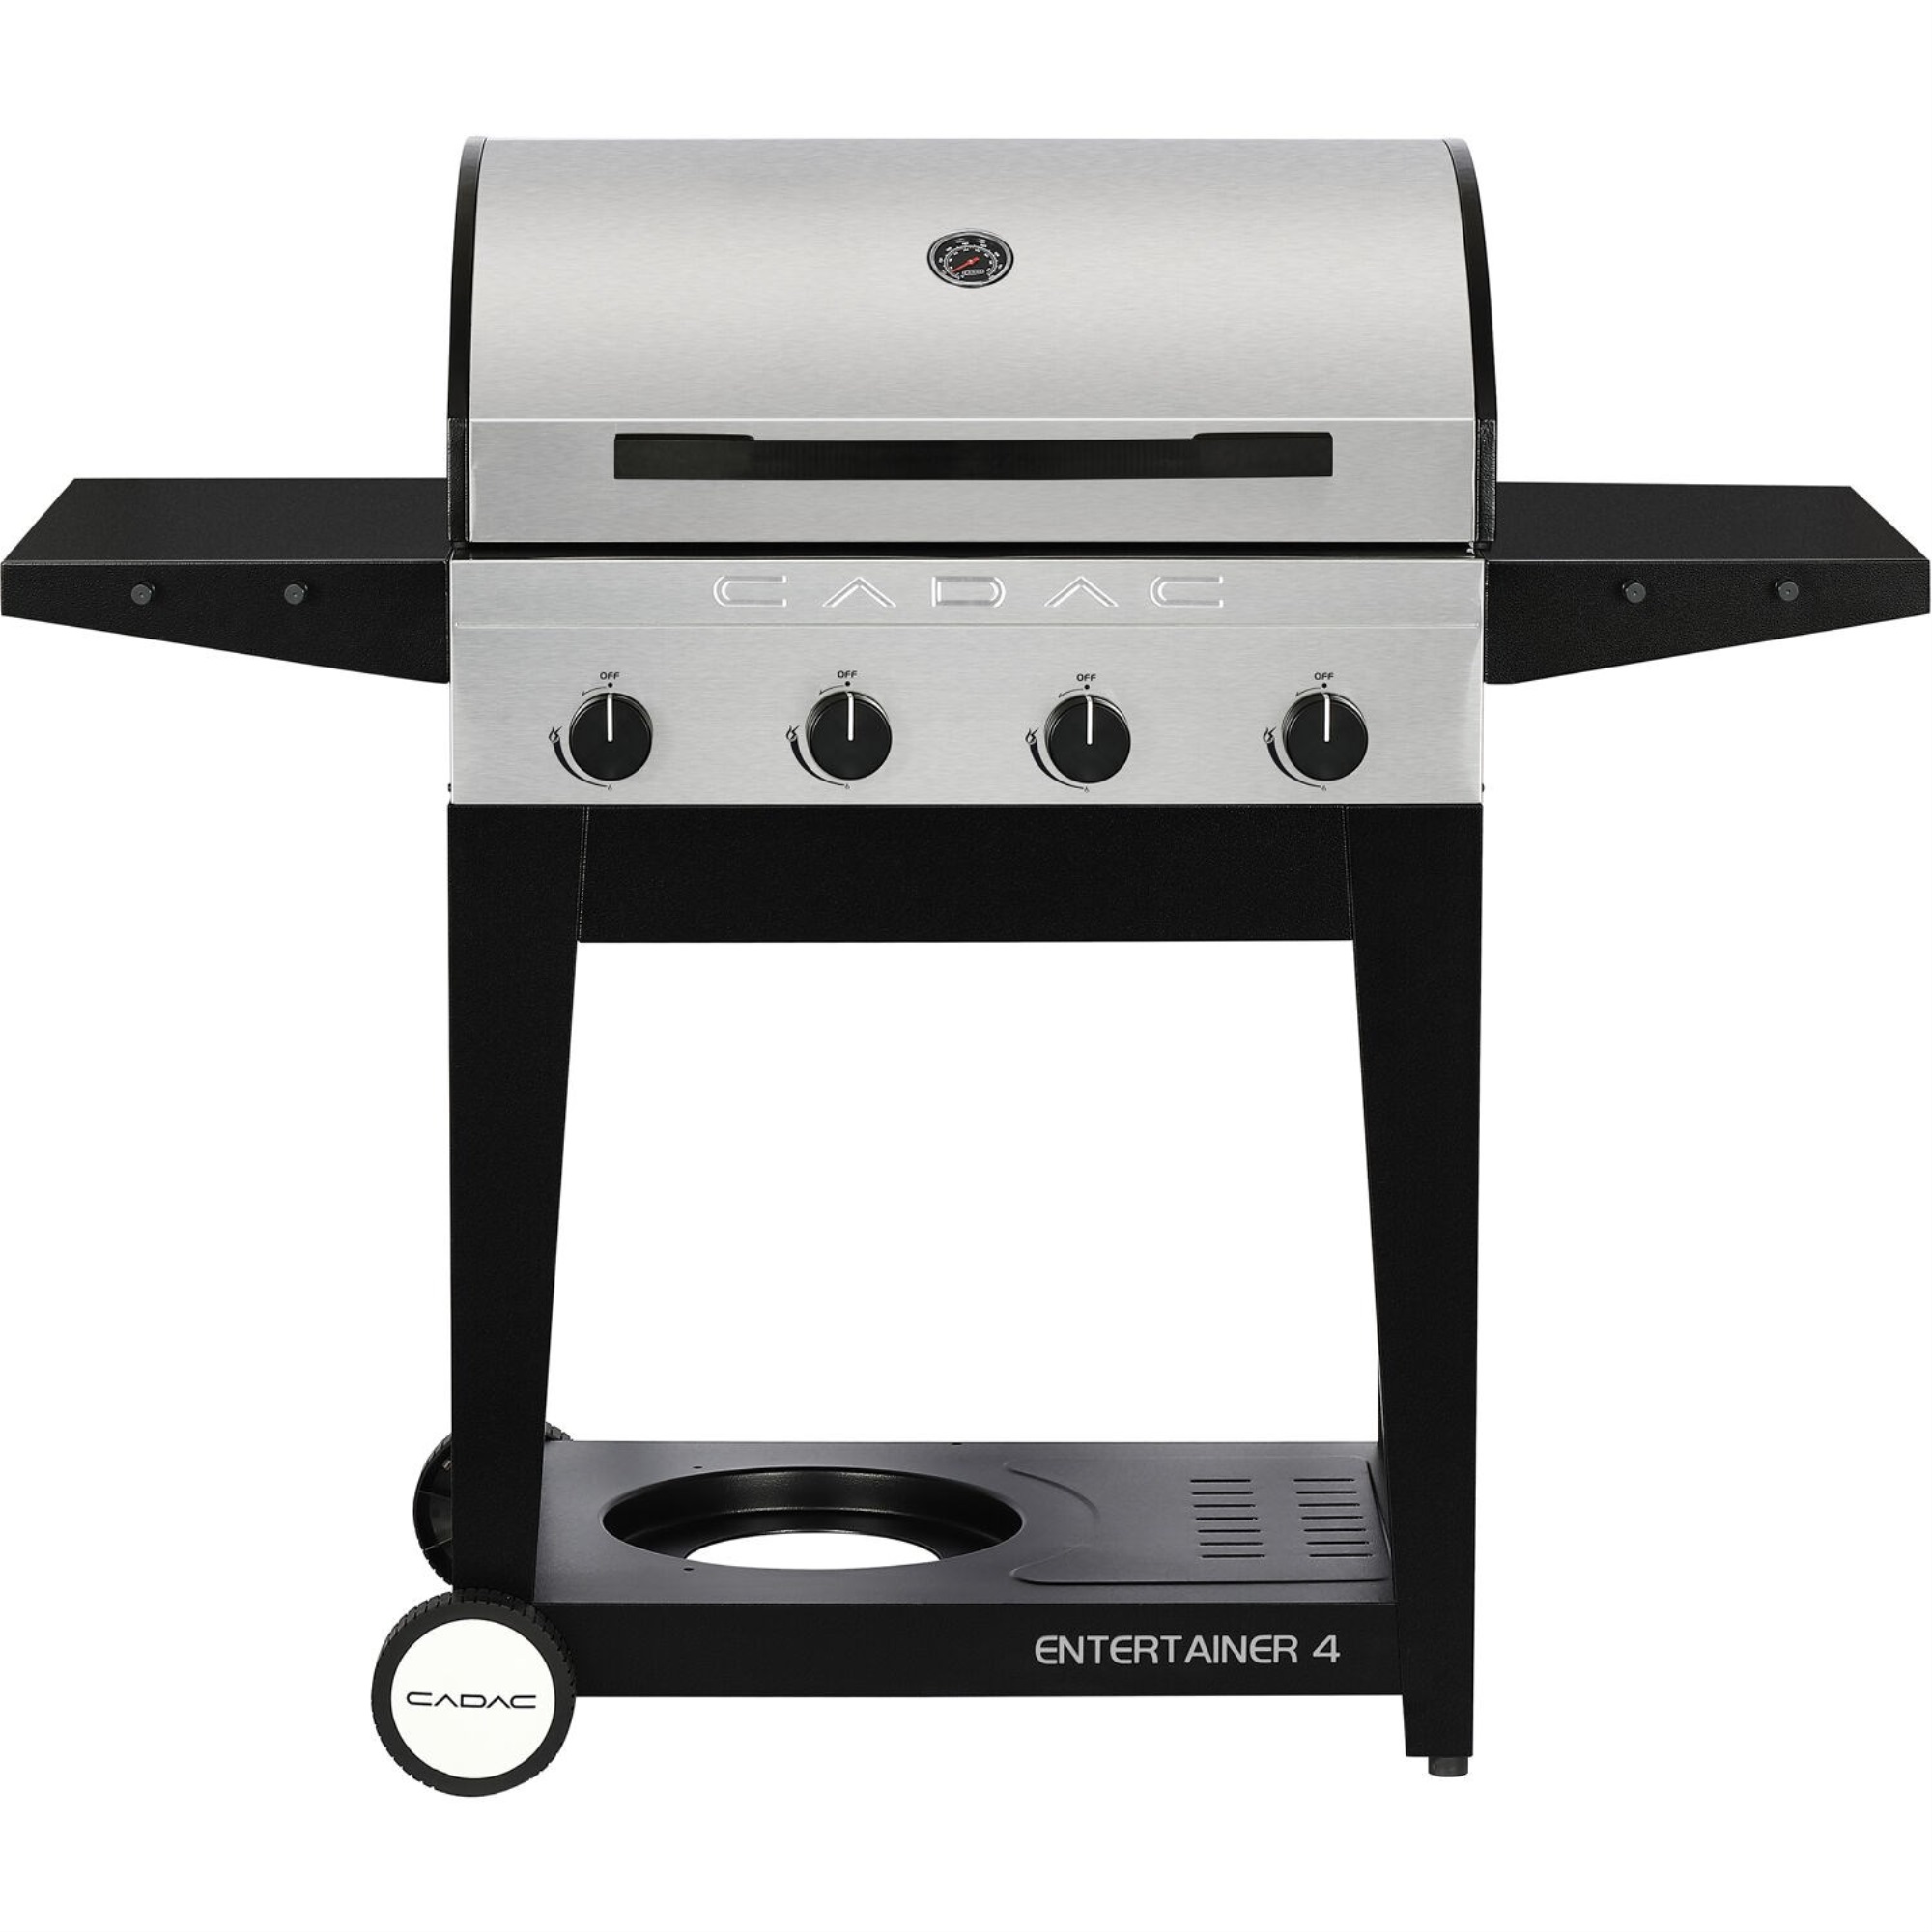 CADAC 98251-41G01-US Entertainer Stainless Steel BBQ 4-Burner Propane Gas Grill with Side Shelves